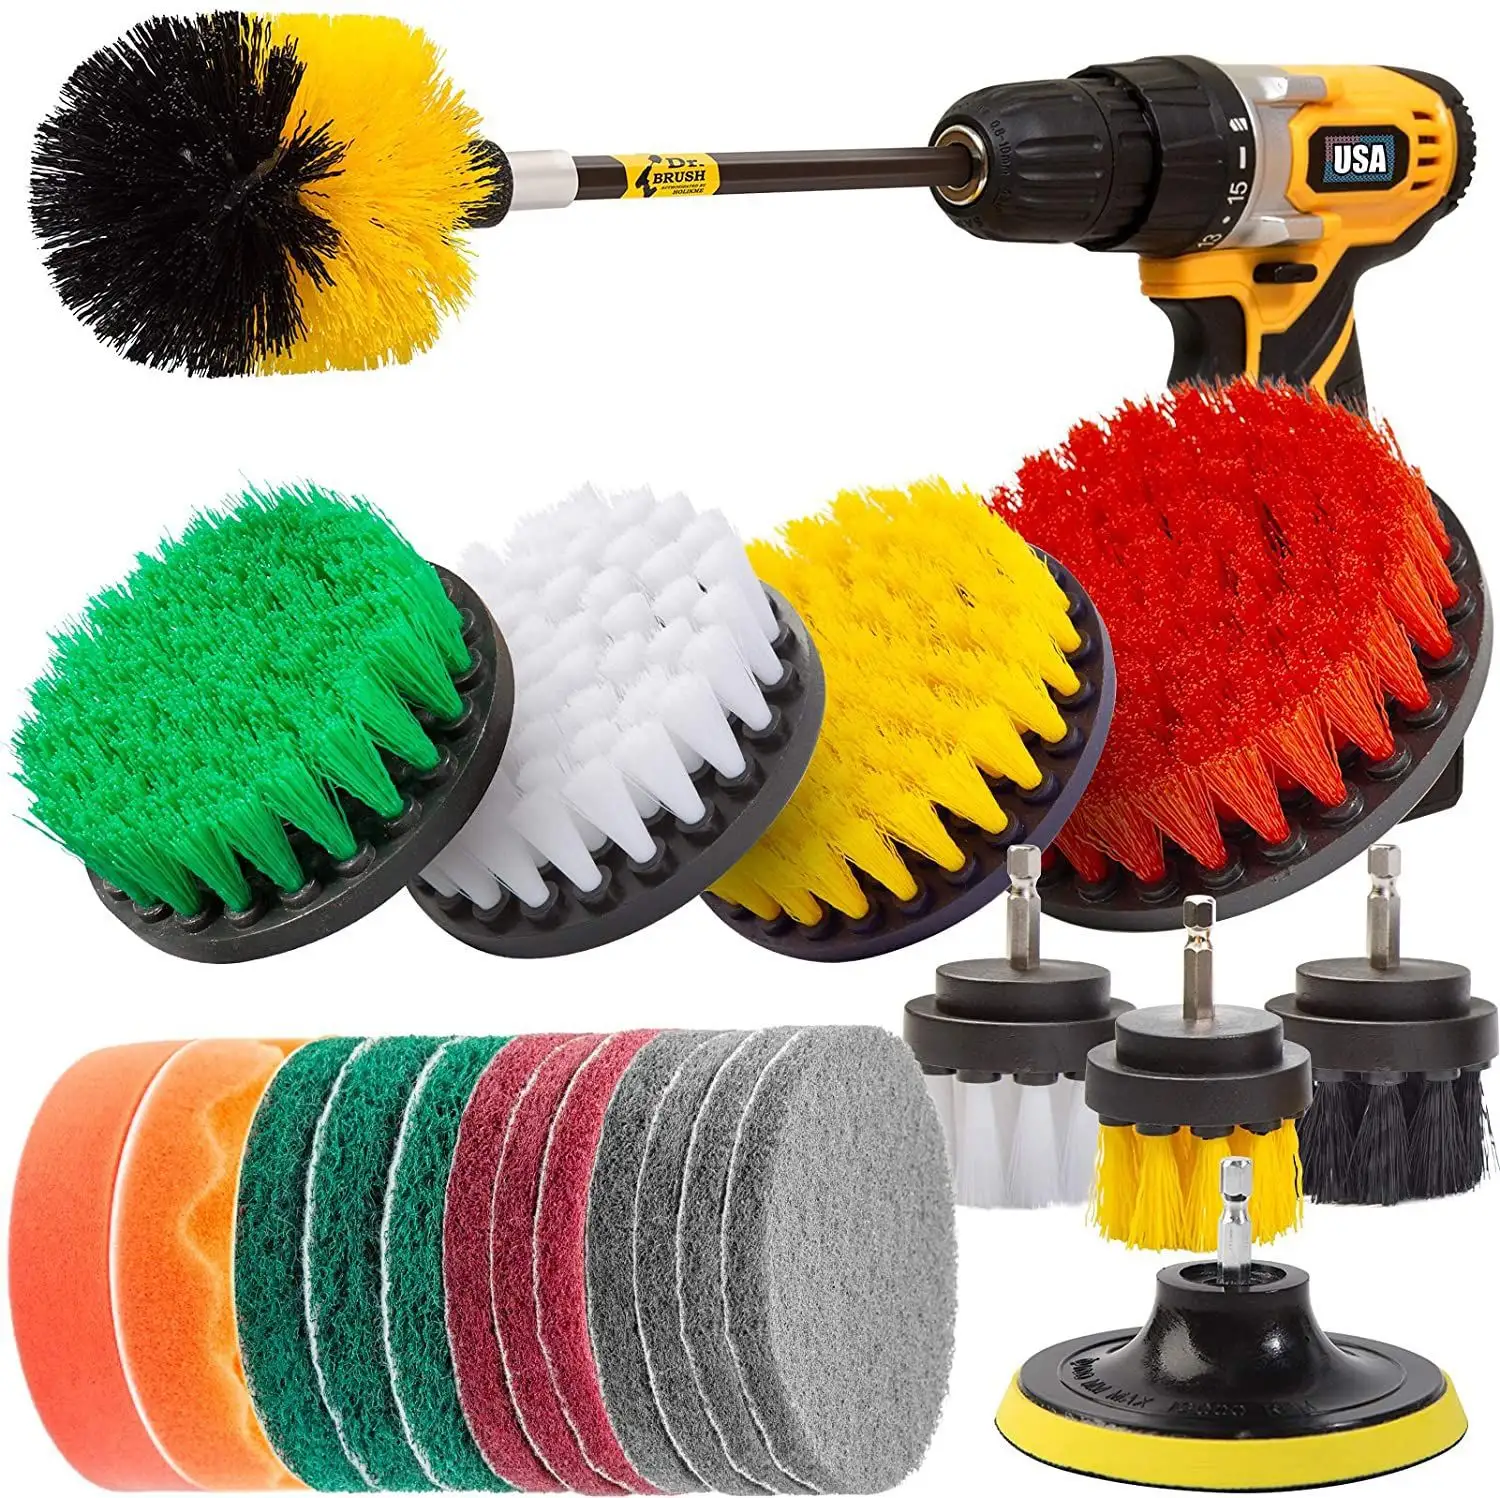 Kitchen Cleaning Drill Brush Bathroom Electronic Drill Brusn Car Washing Electric Drill Rotary Cleaning Brush